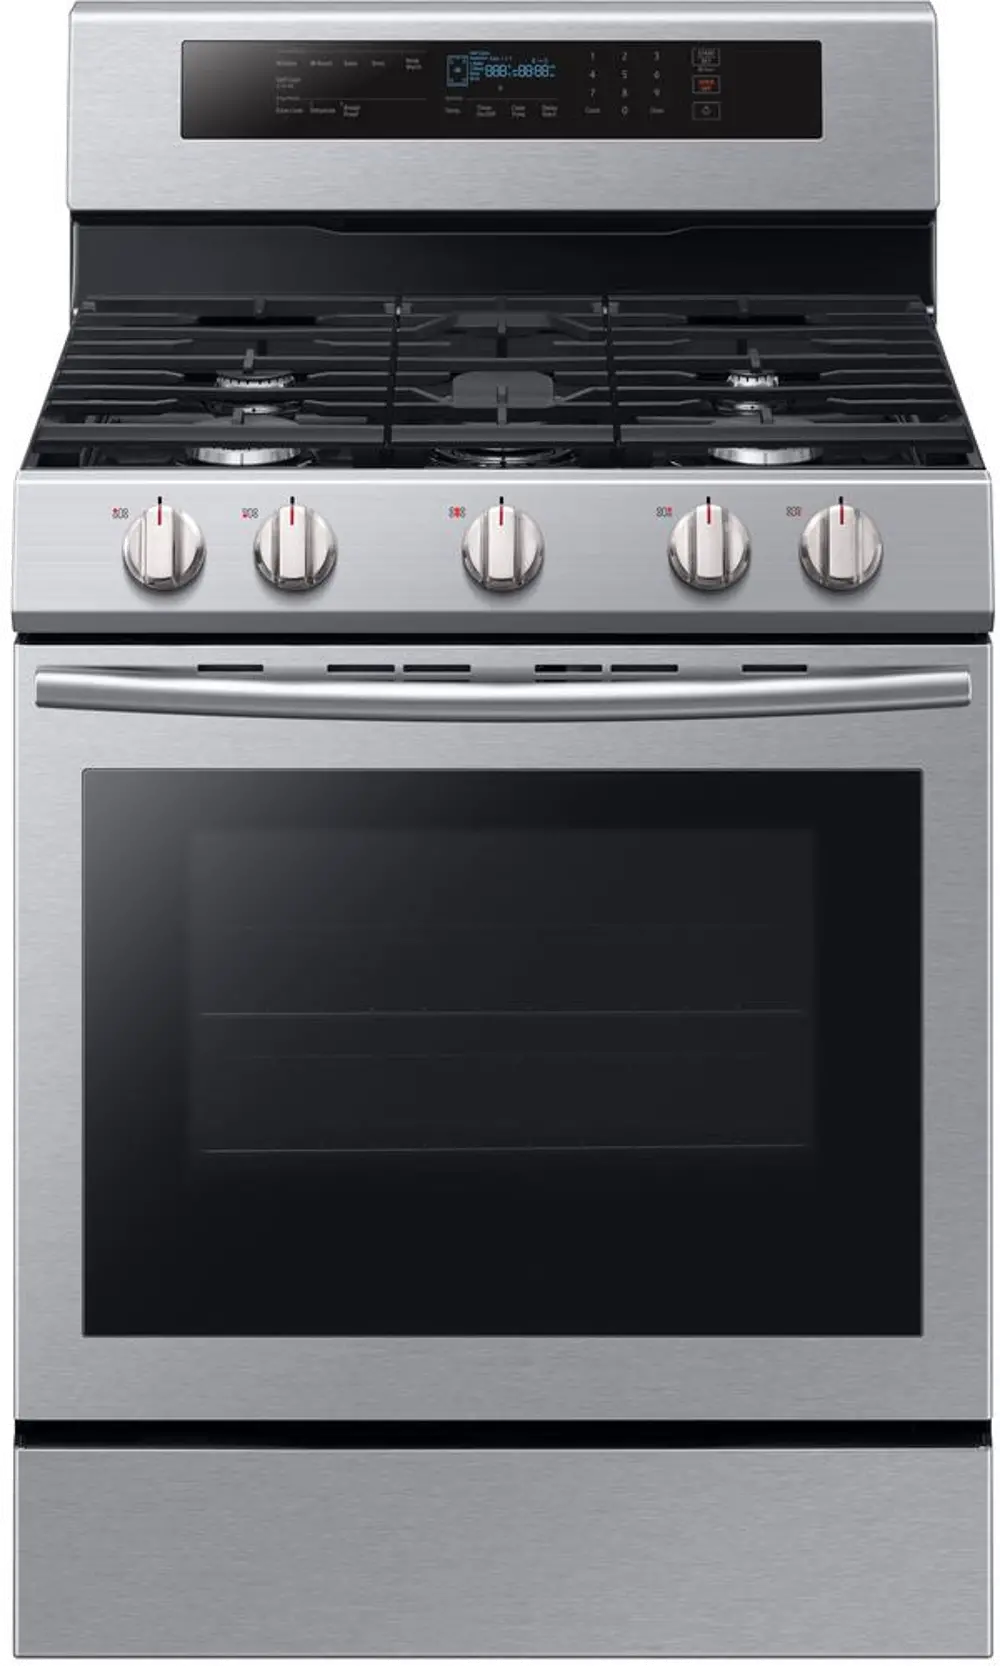 NX58M6630SS Samsung Gas Range with True Convection Oven - 5.8 cu. ft. Stainless Steel-1